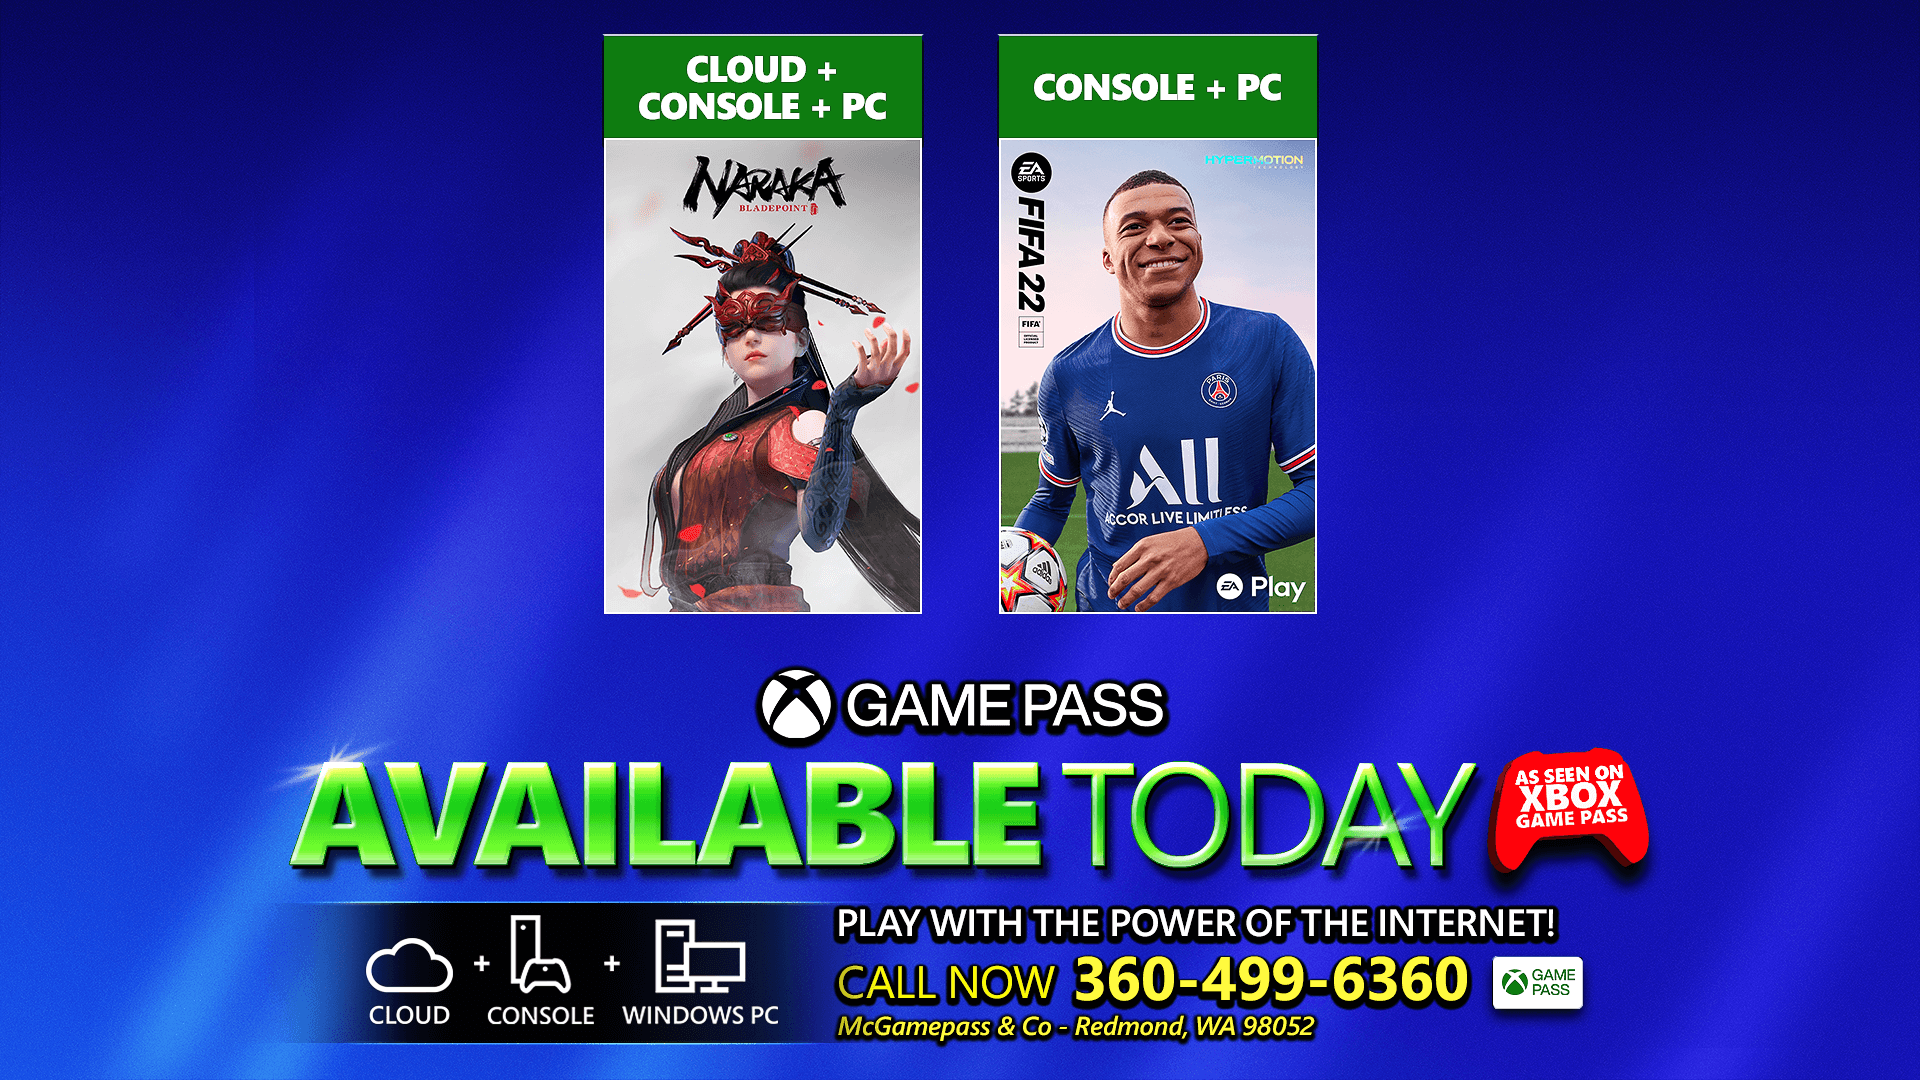 Xbox Game Pass on Twitter: ""when FIFA 22?" now FIFA 22.  https://t.co/Su2oJorbMn" / Twitter